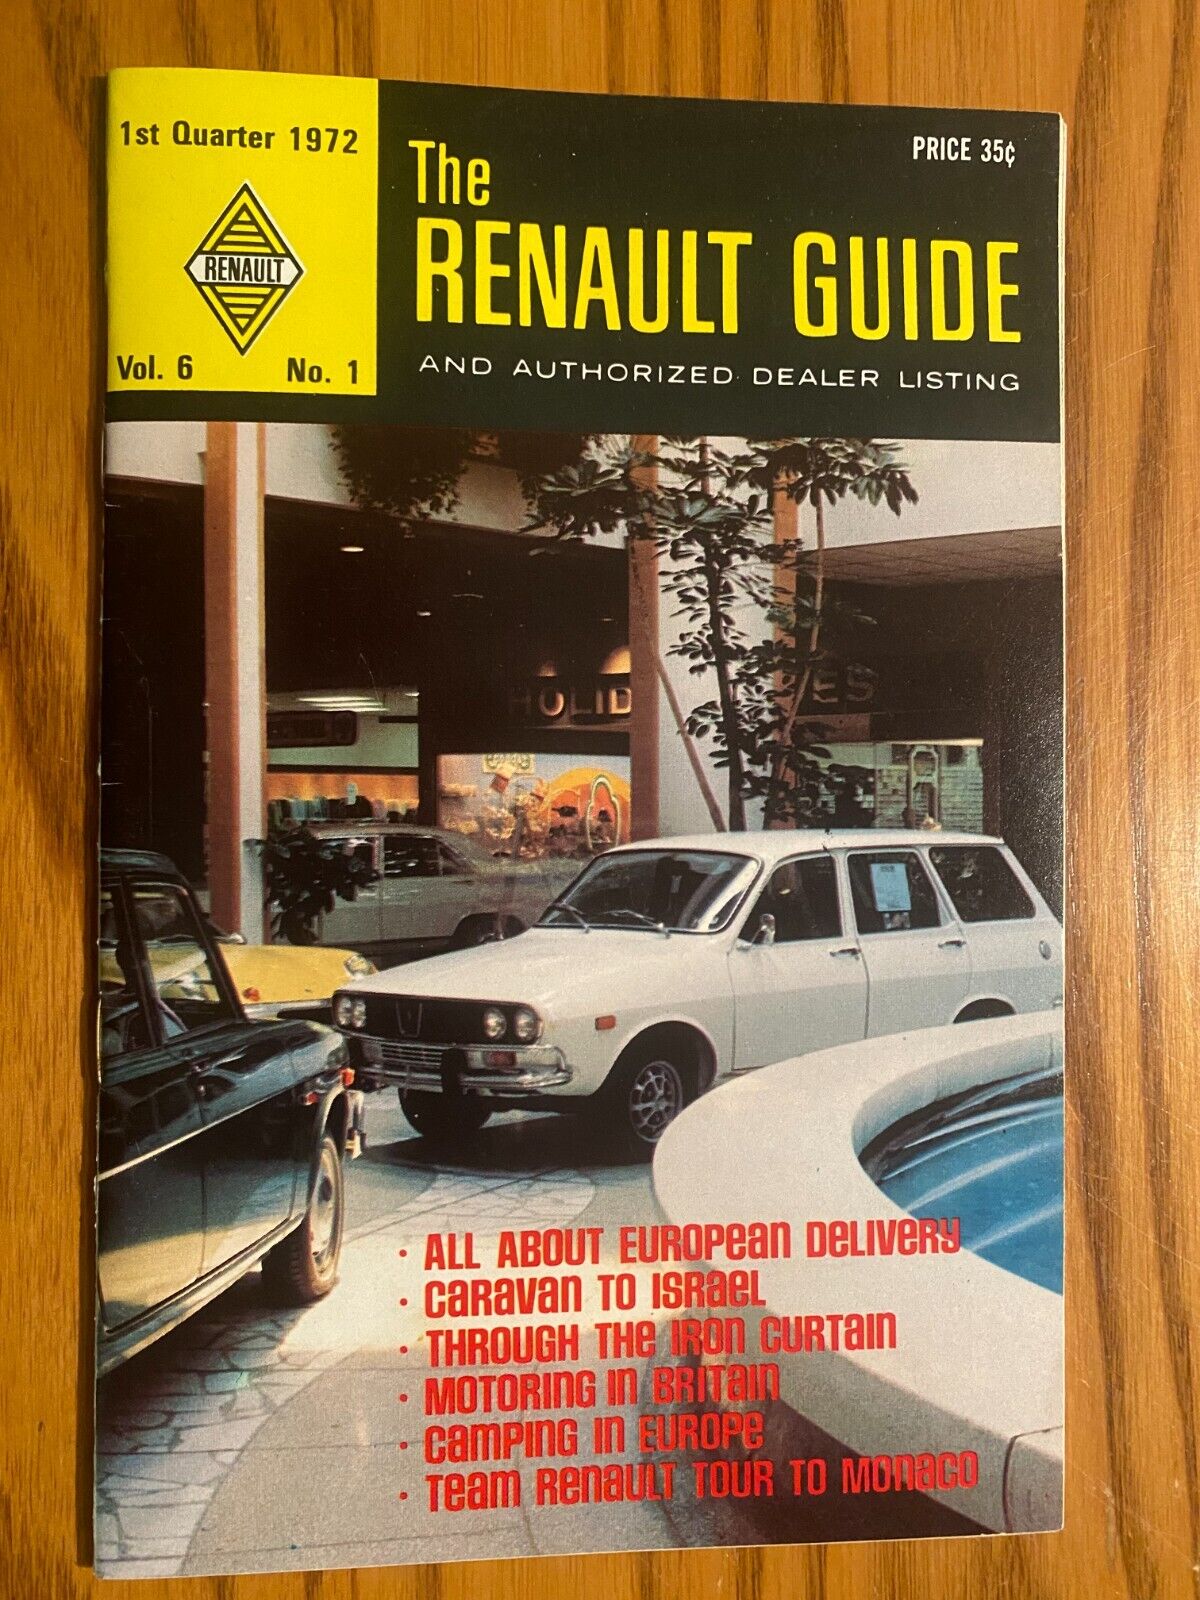 The Renault Guide Vol. 6 No. 1 - 1st Quarter 1972 - Nice Condition - Rare in USA